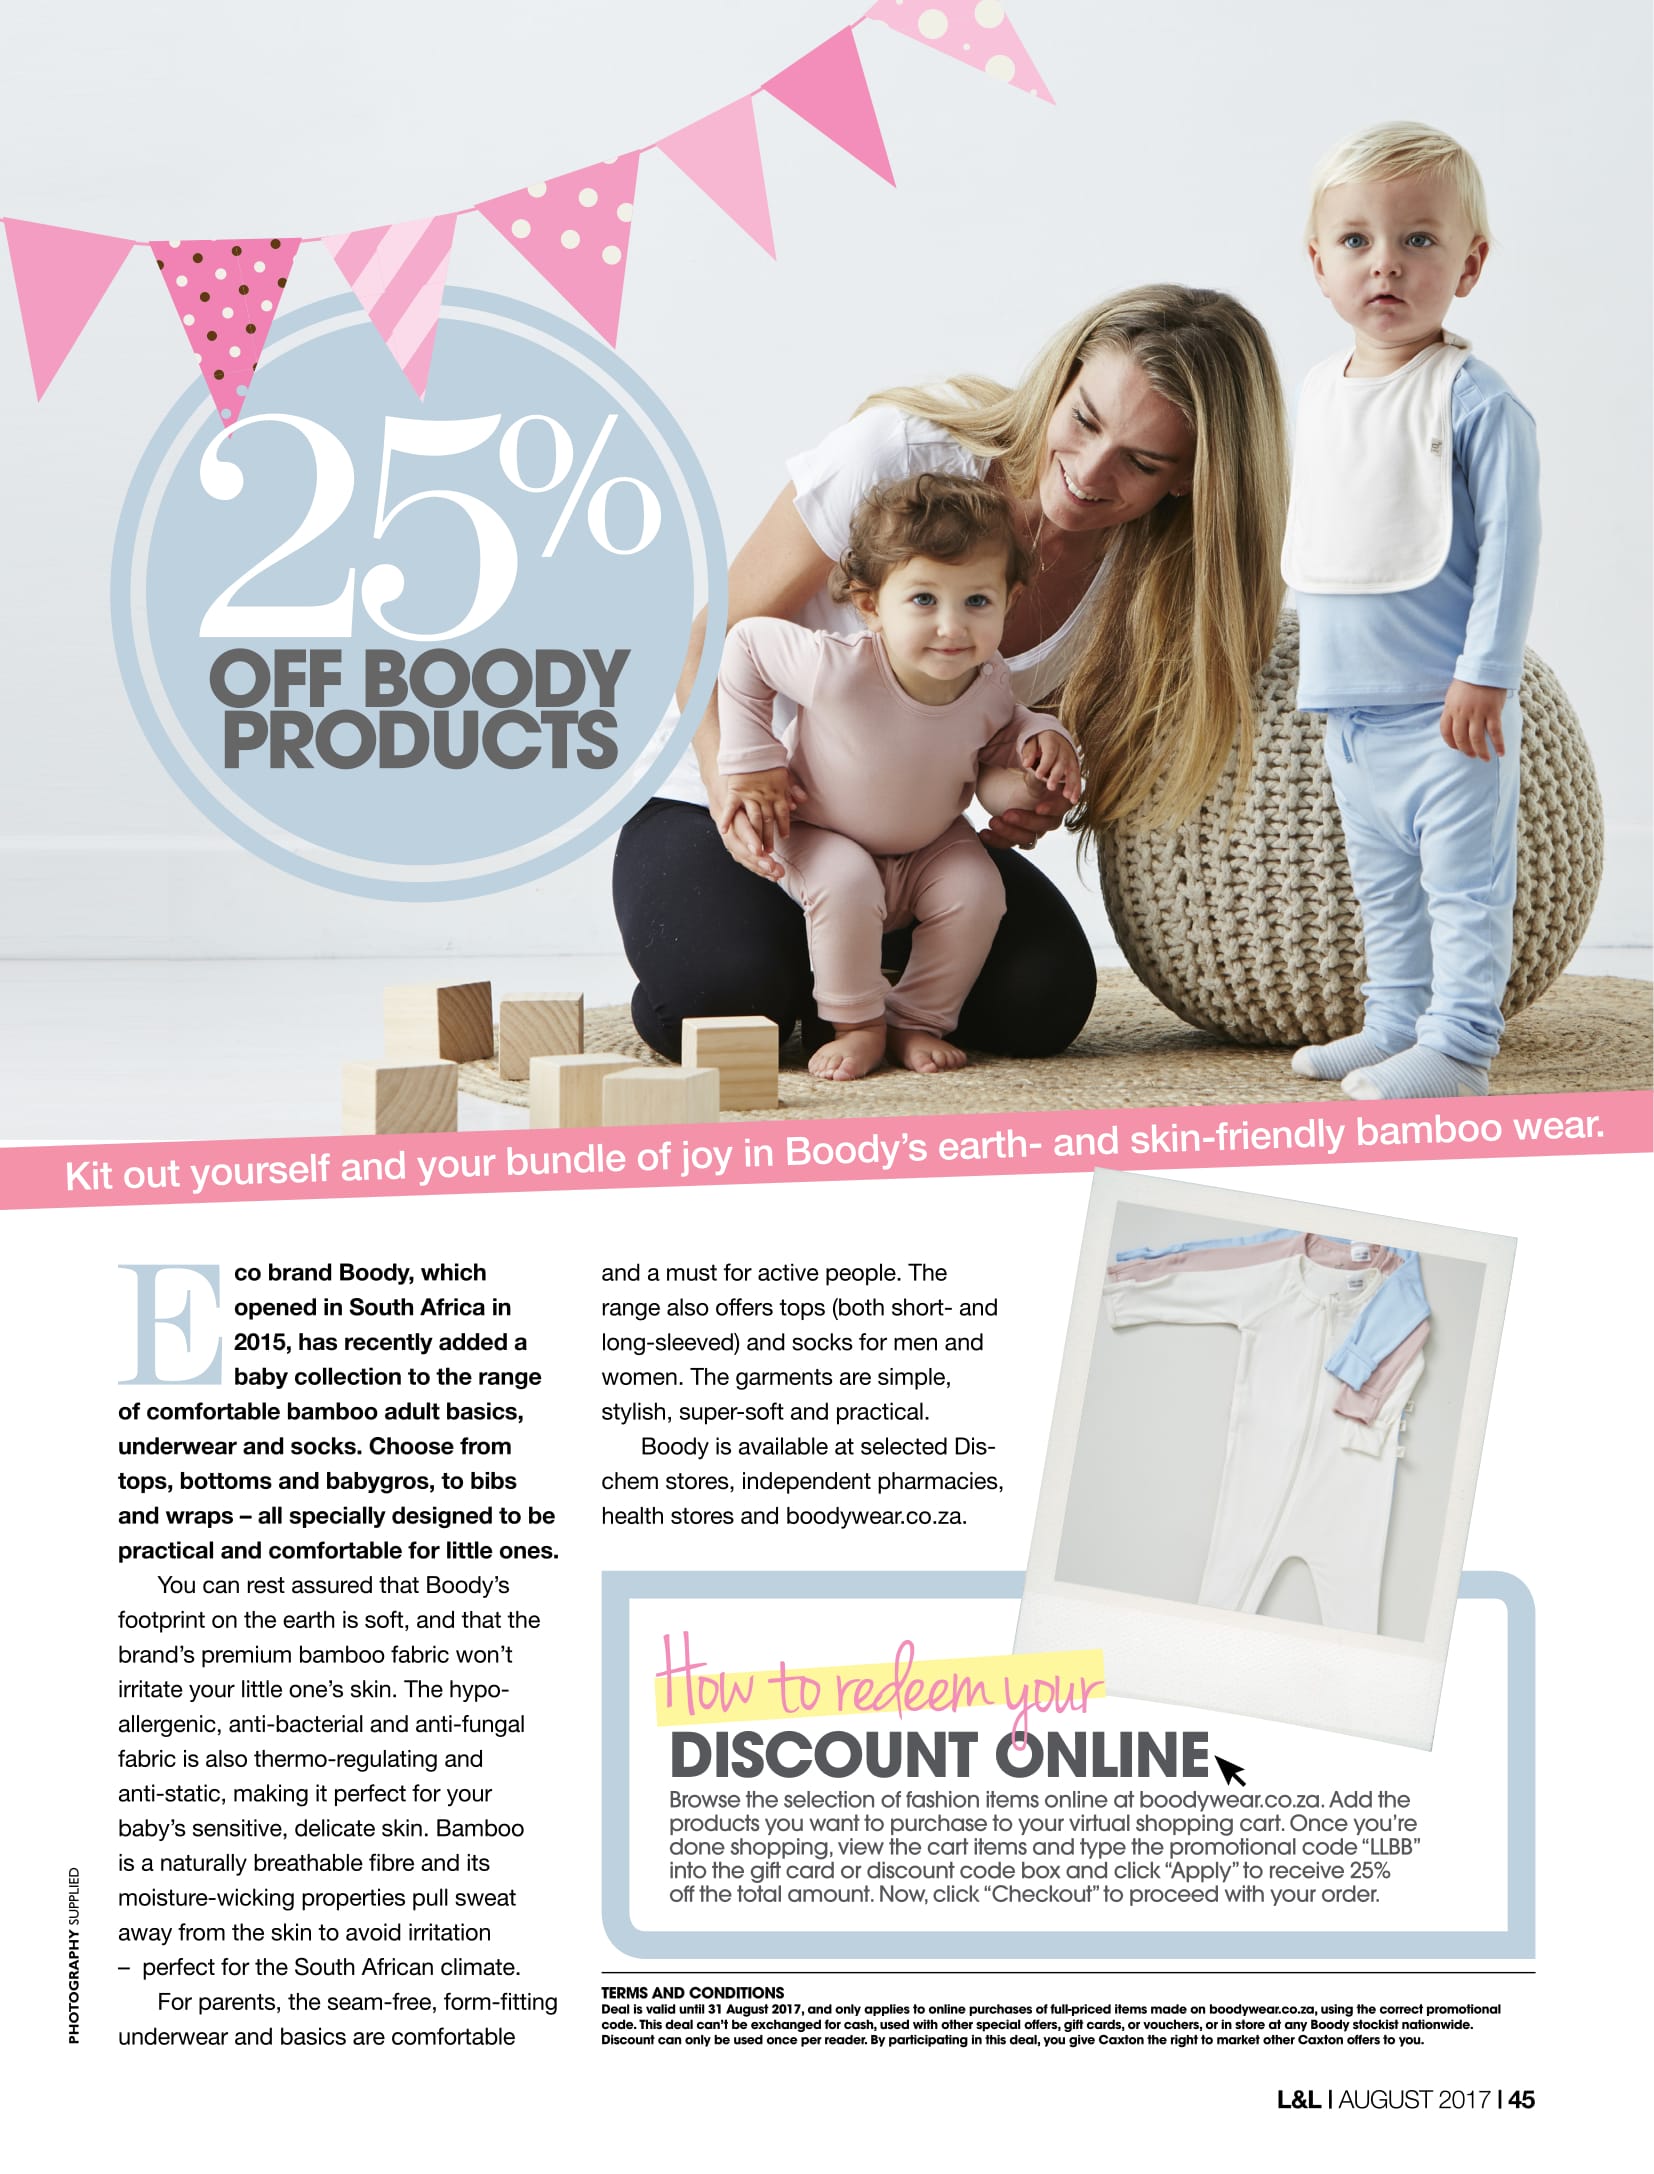 Living and Loving: 25% off Boody products